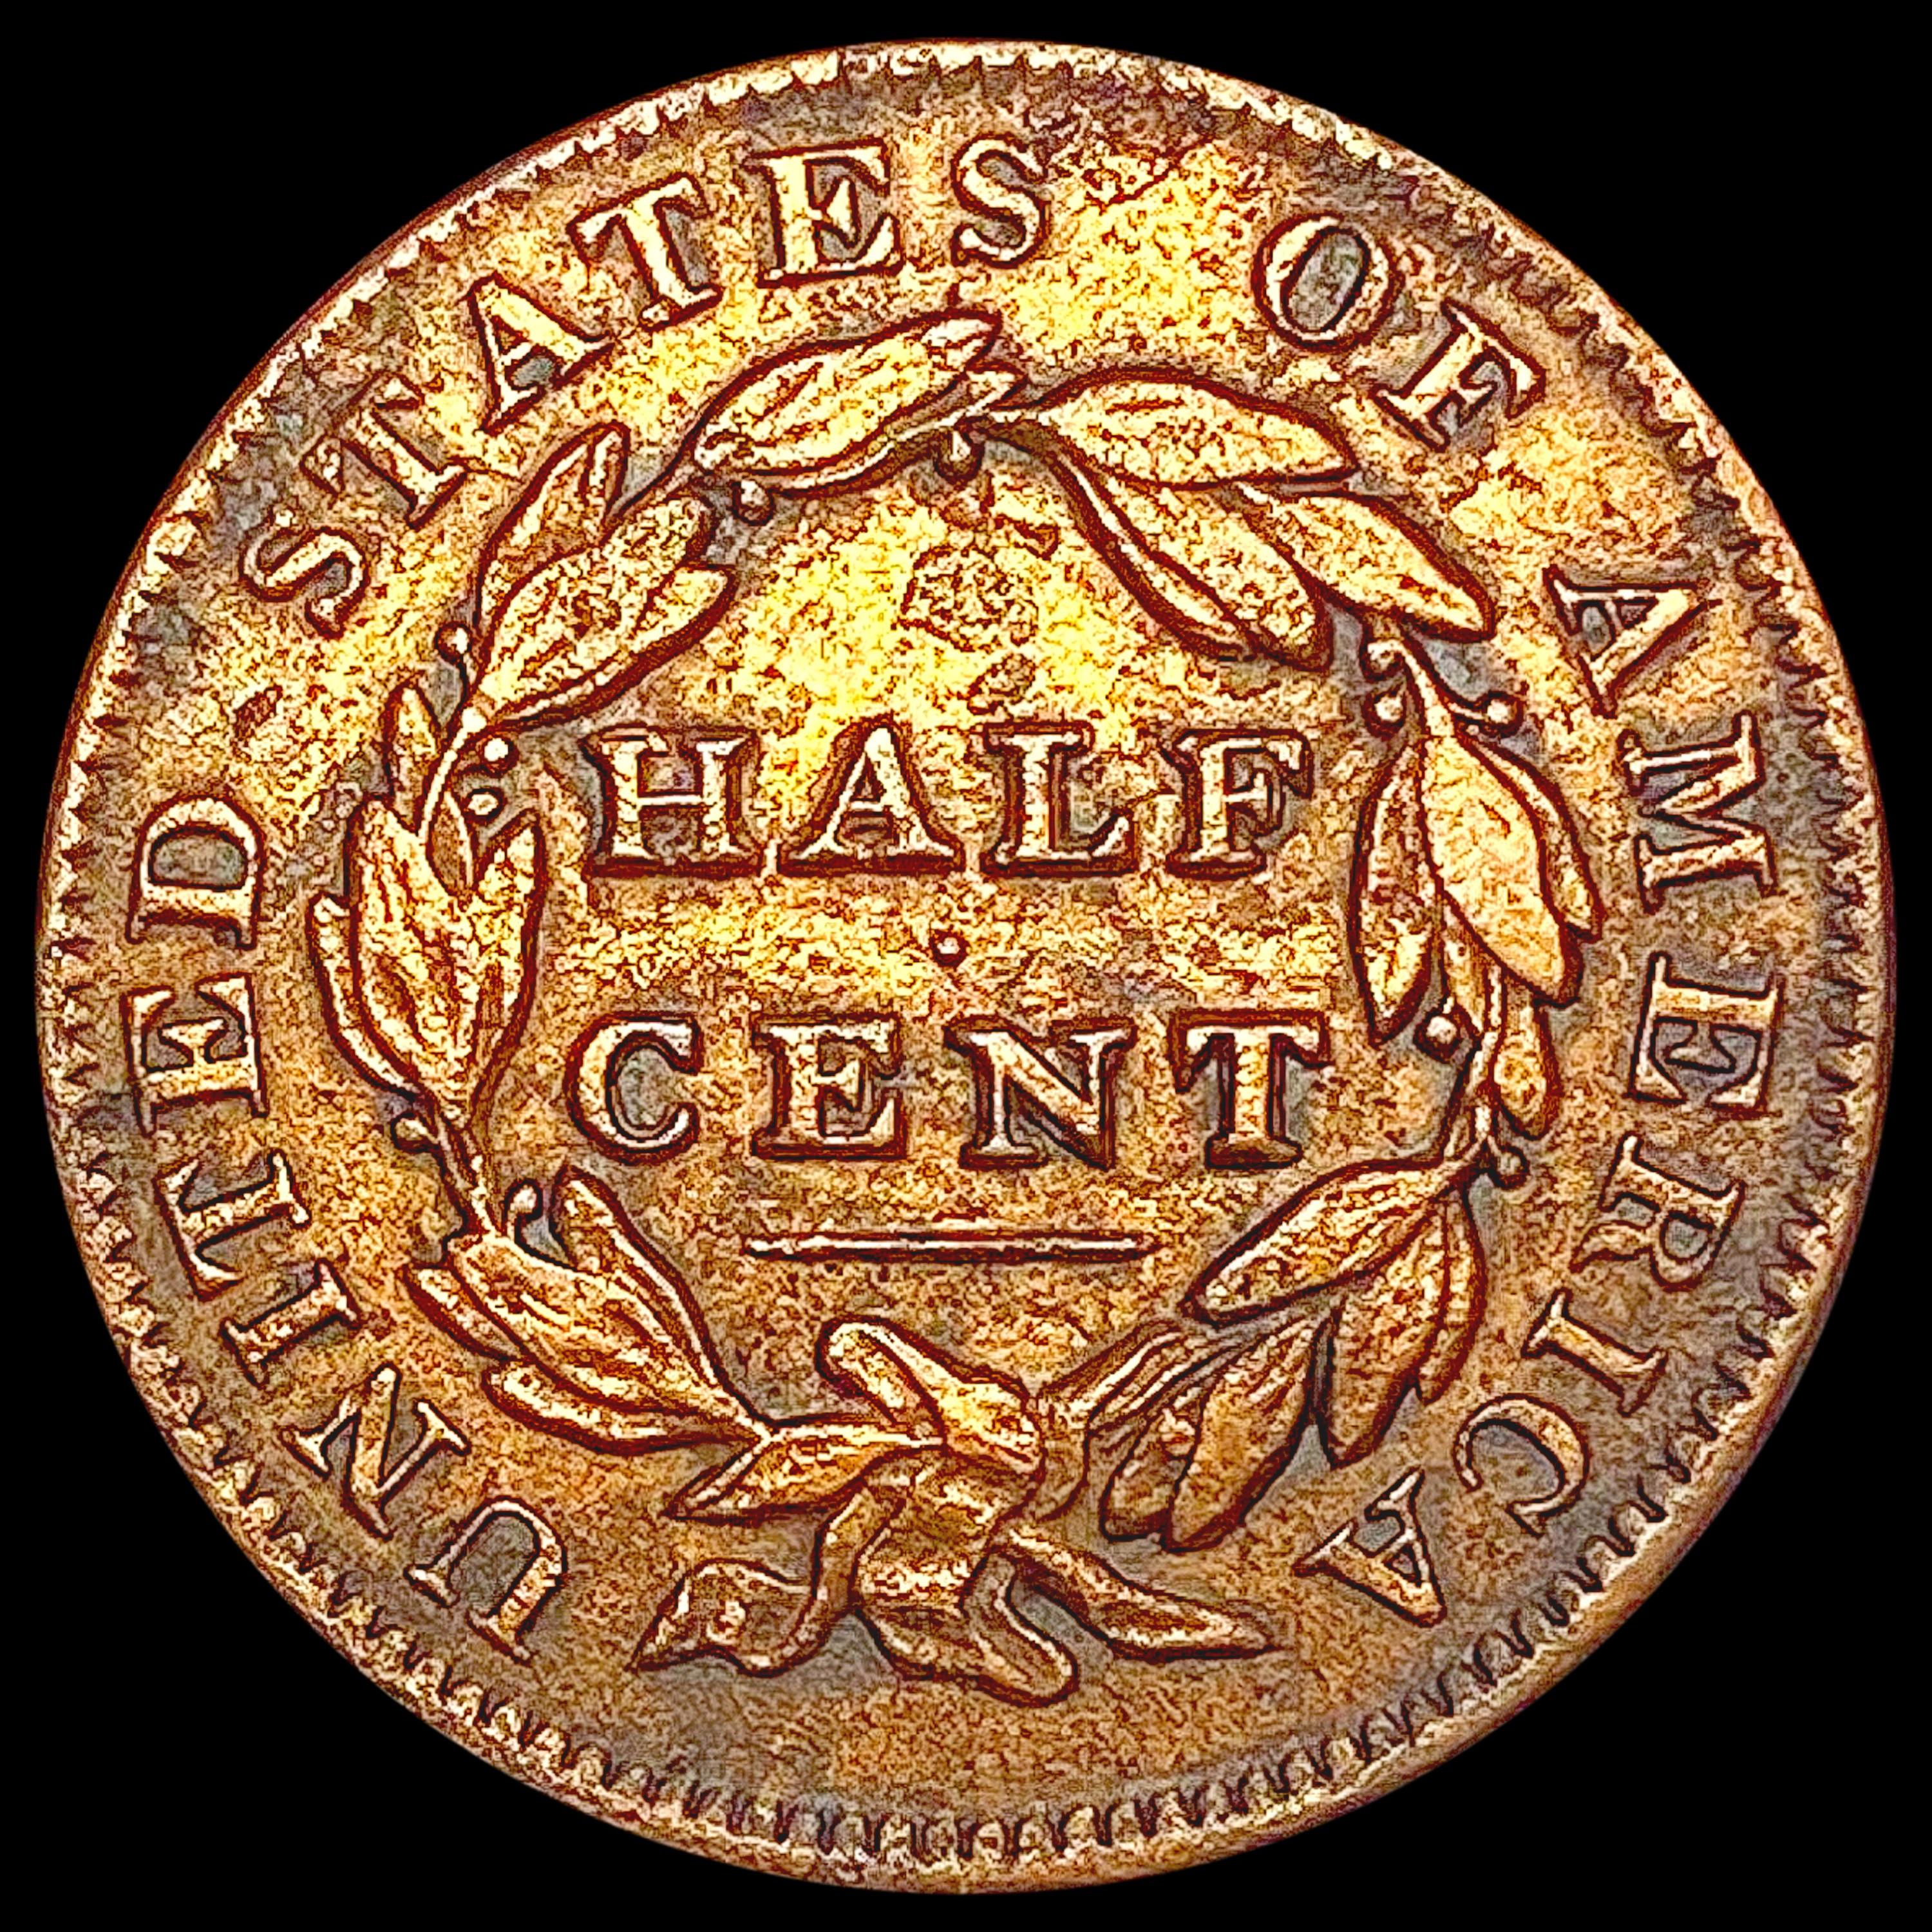 1835 Classic Head Half Cent NEARLY UNCIRCULATED